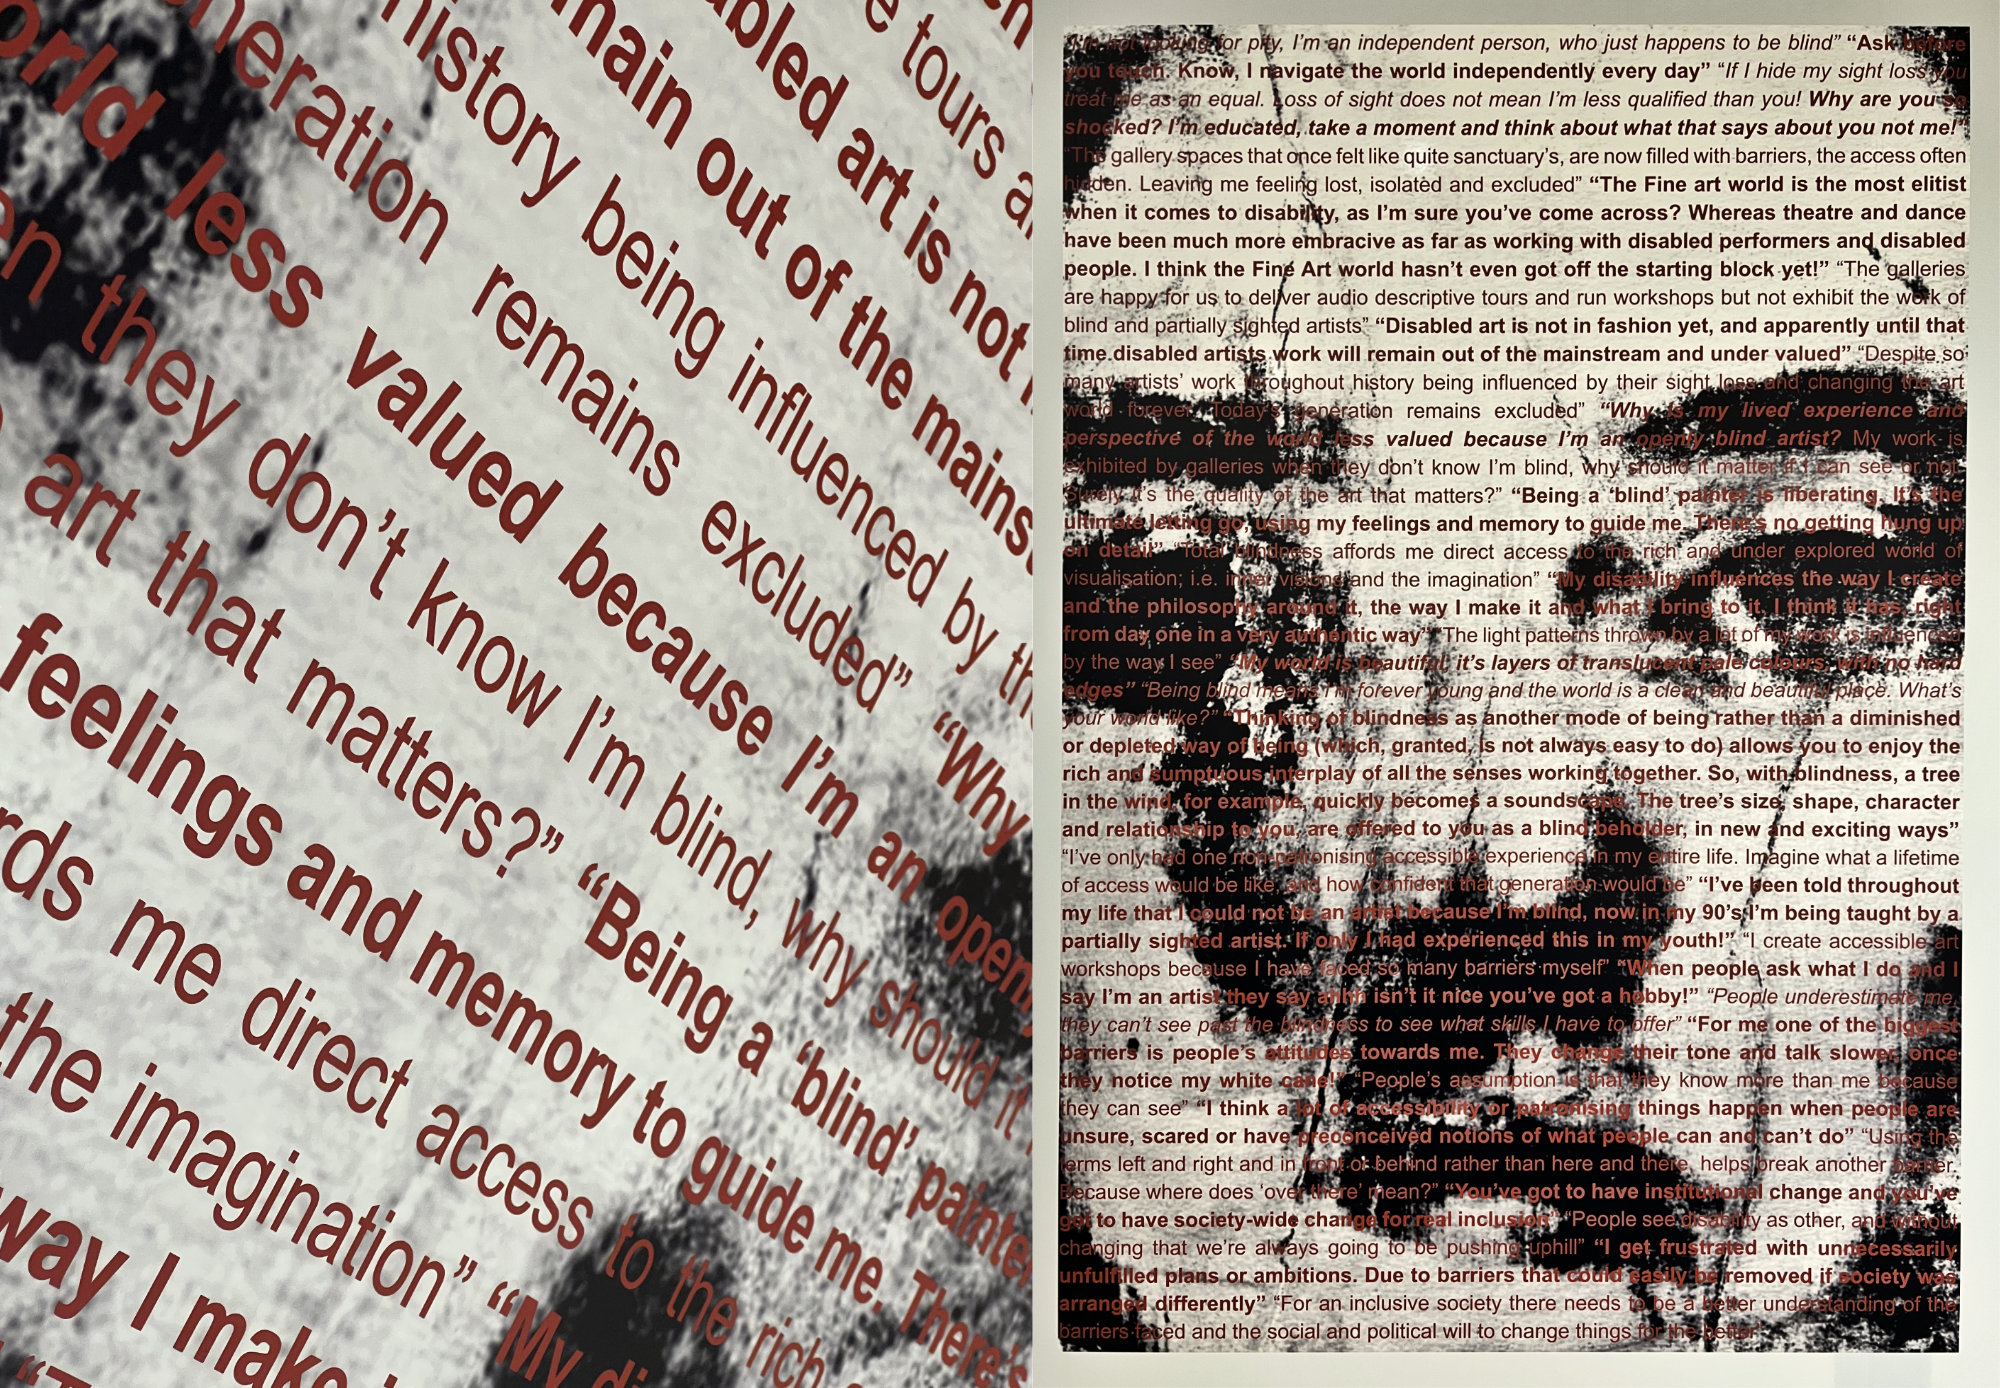 This image shows 2 perspectives of the physical work, showing words which are shared in the audio description and transcription in full scrawled over a distorted image of a female face. The colors are dark-brown to black for the portrait of the face with the letters shown in a bronze-brown colour.